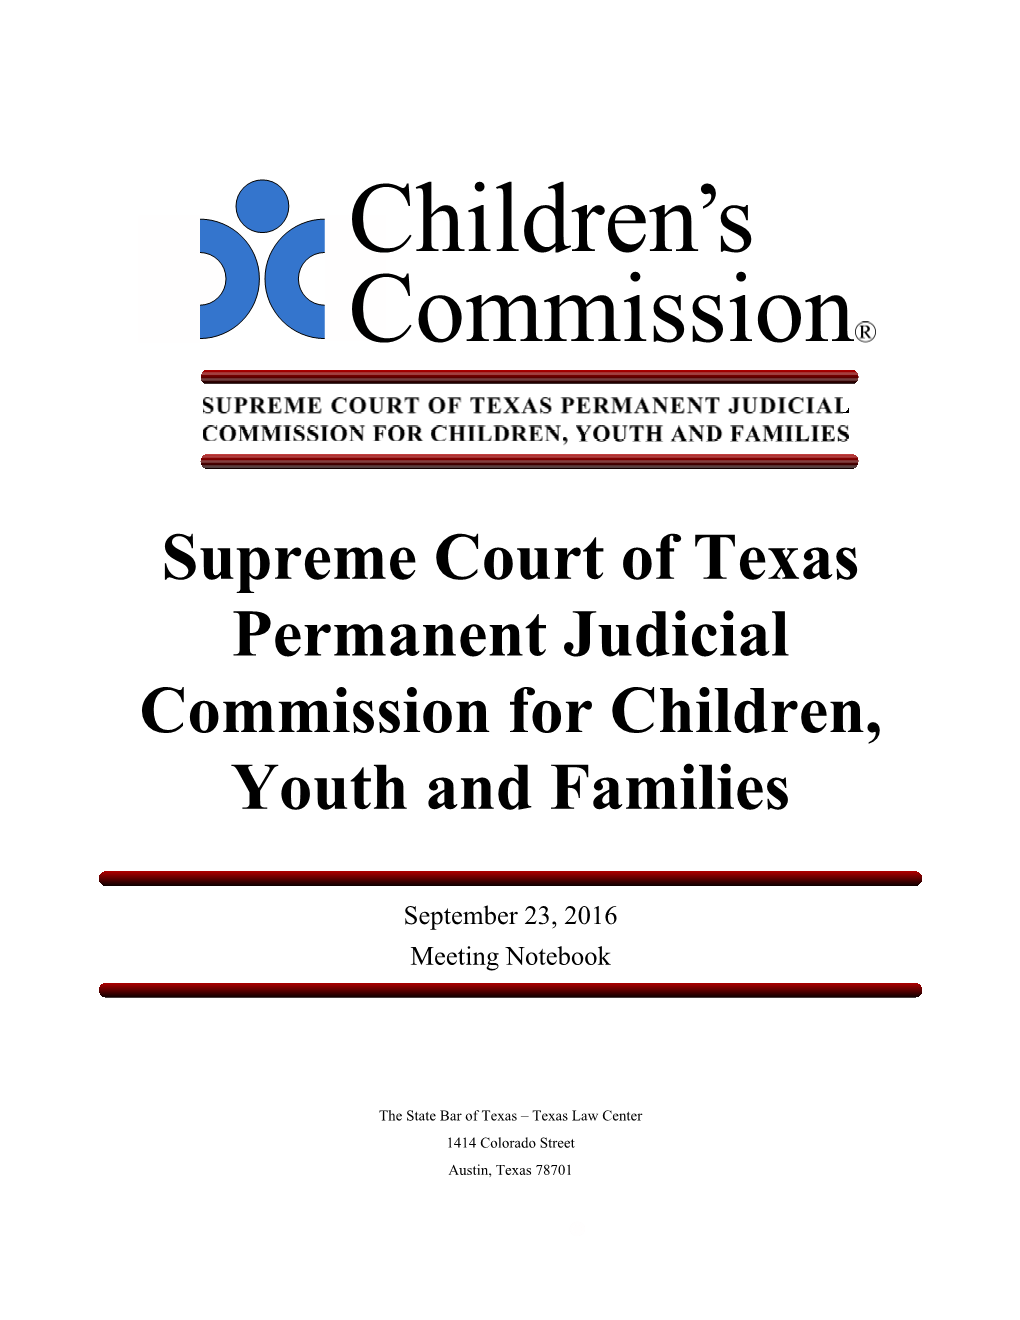 Supreme Court of Texas Permanent Judicial Commission for Children, Youth and Families